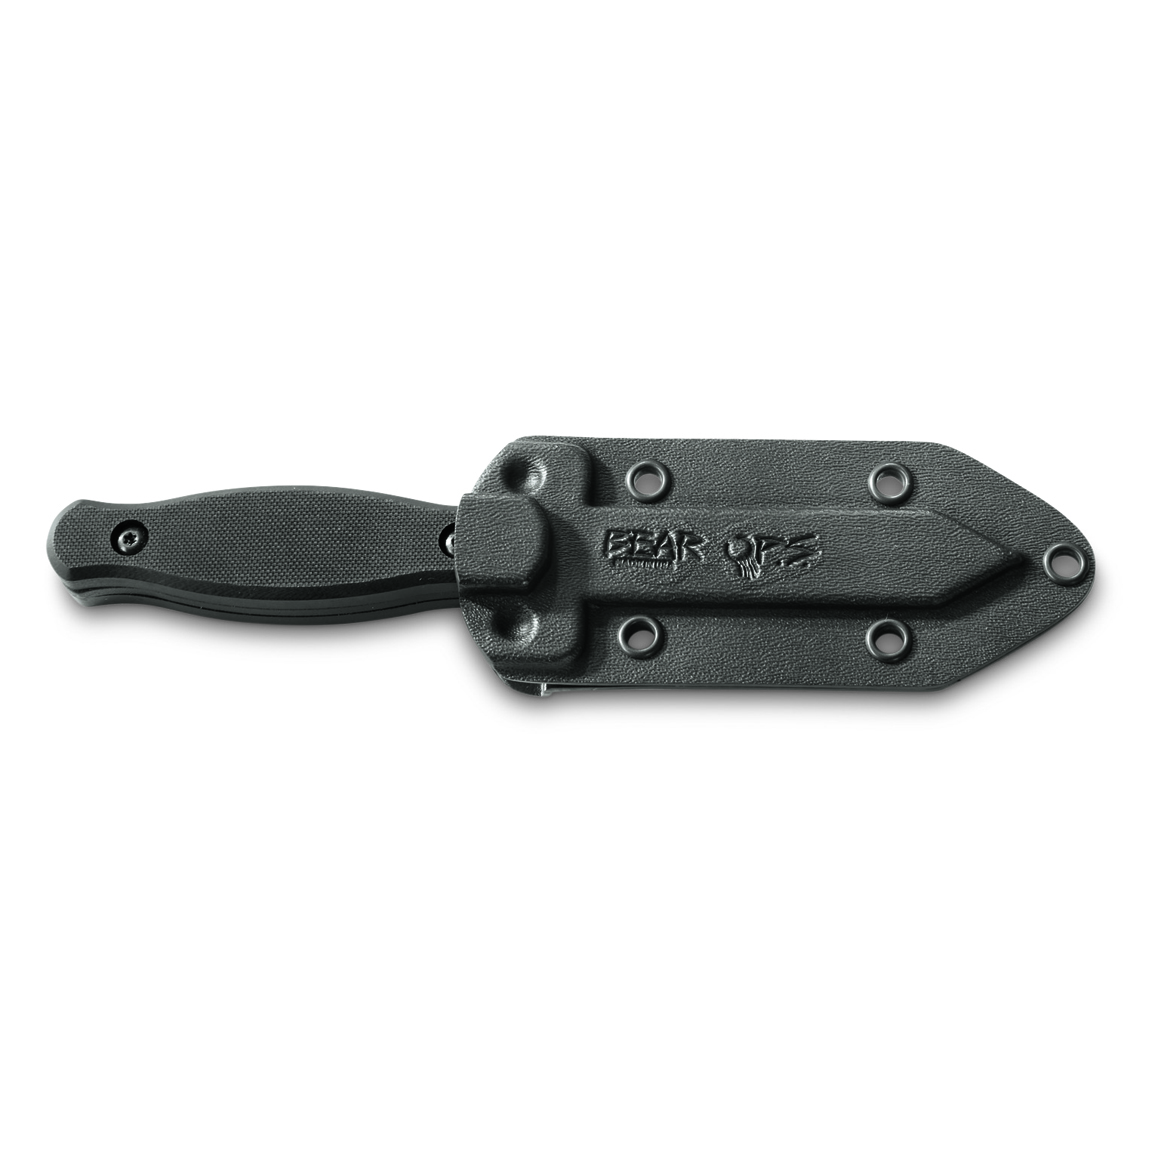 Outdoor Edge 3.0 Drop-Point Blade Pack, Black Oxide, 6 Pack - 734054,  Field Care Knives at Sportsman's Guide